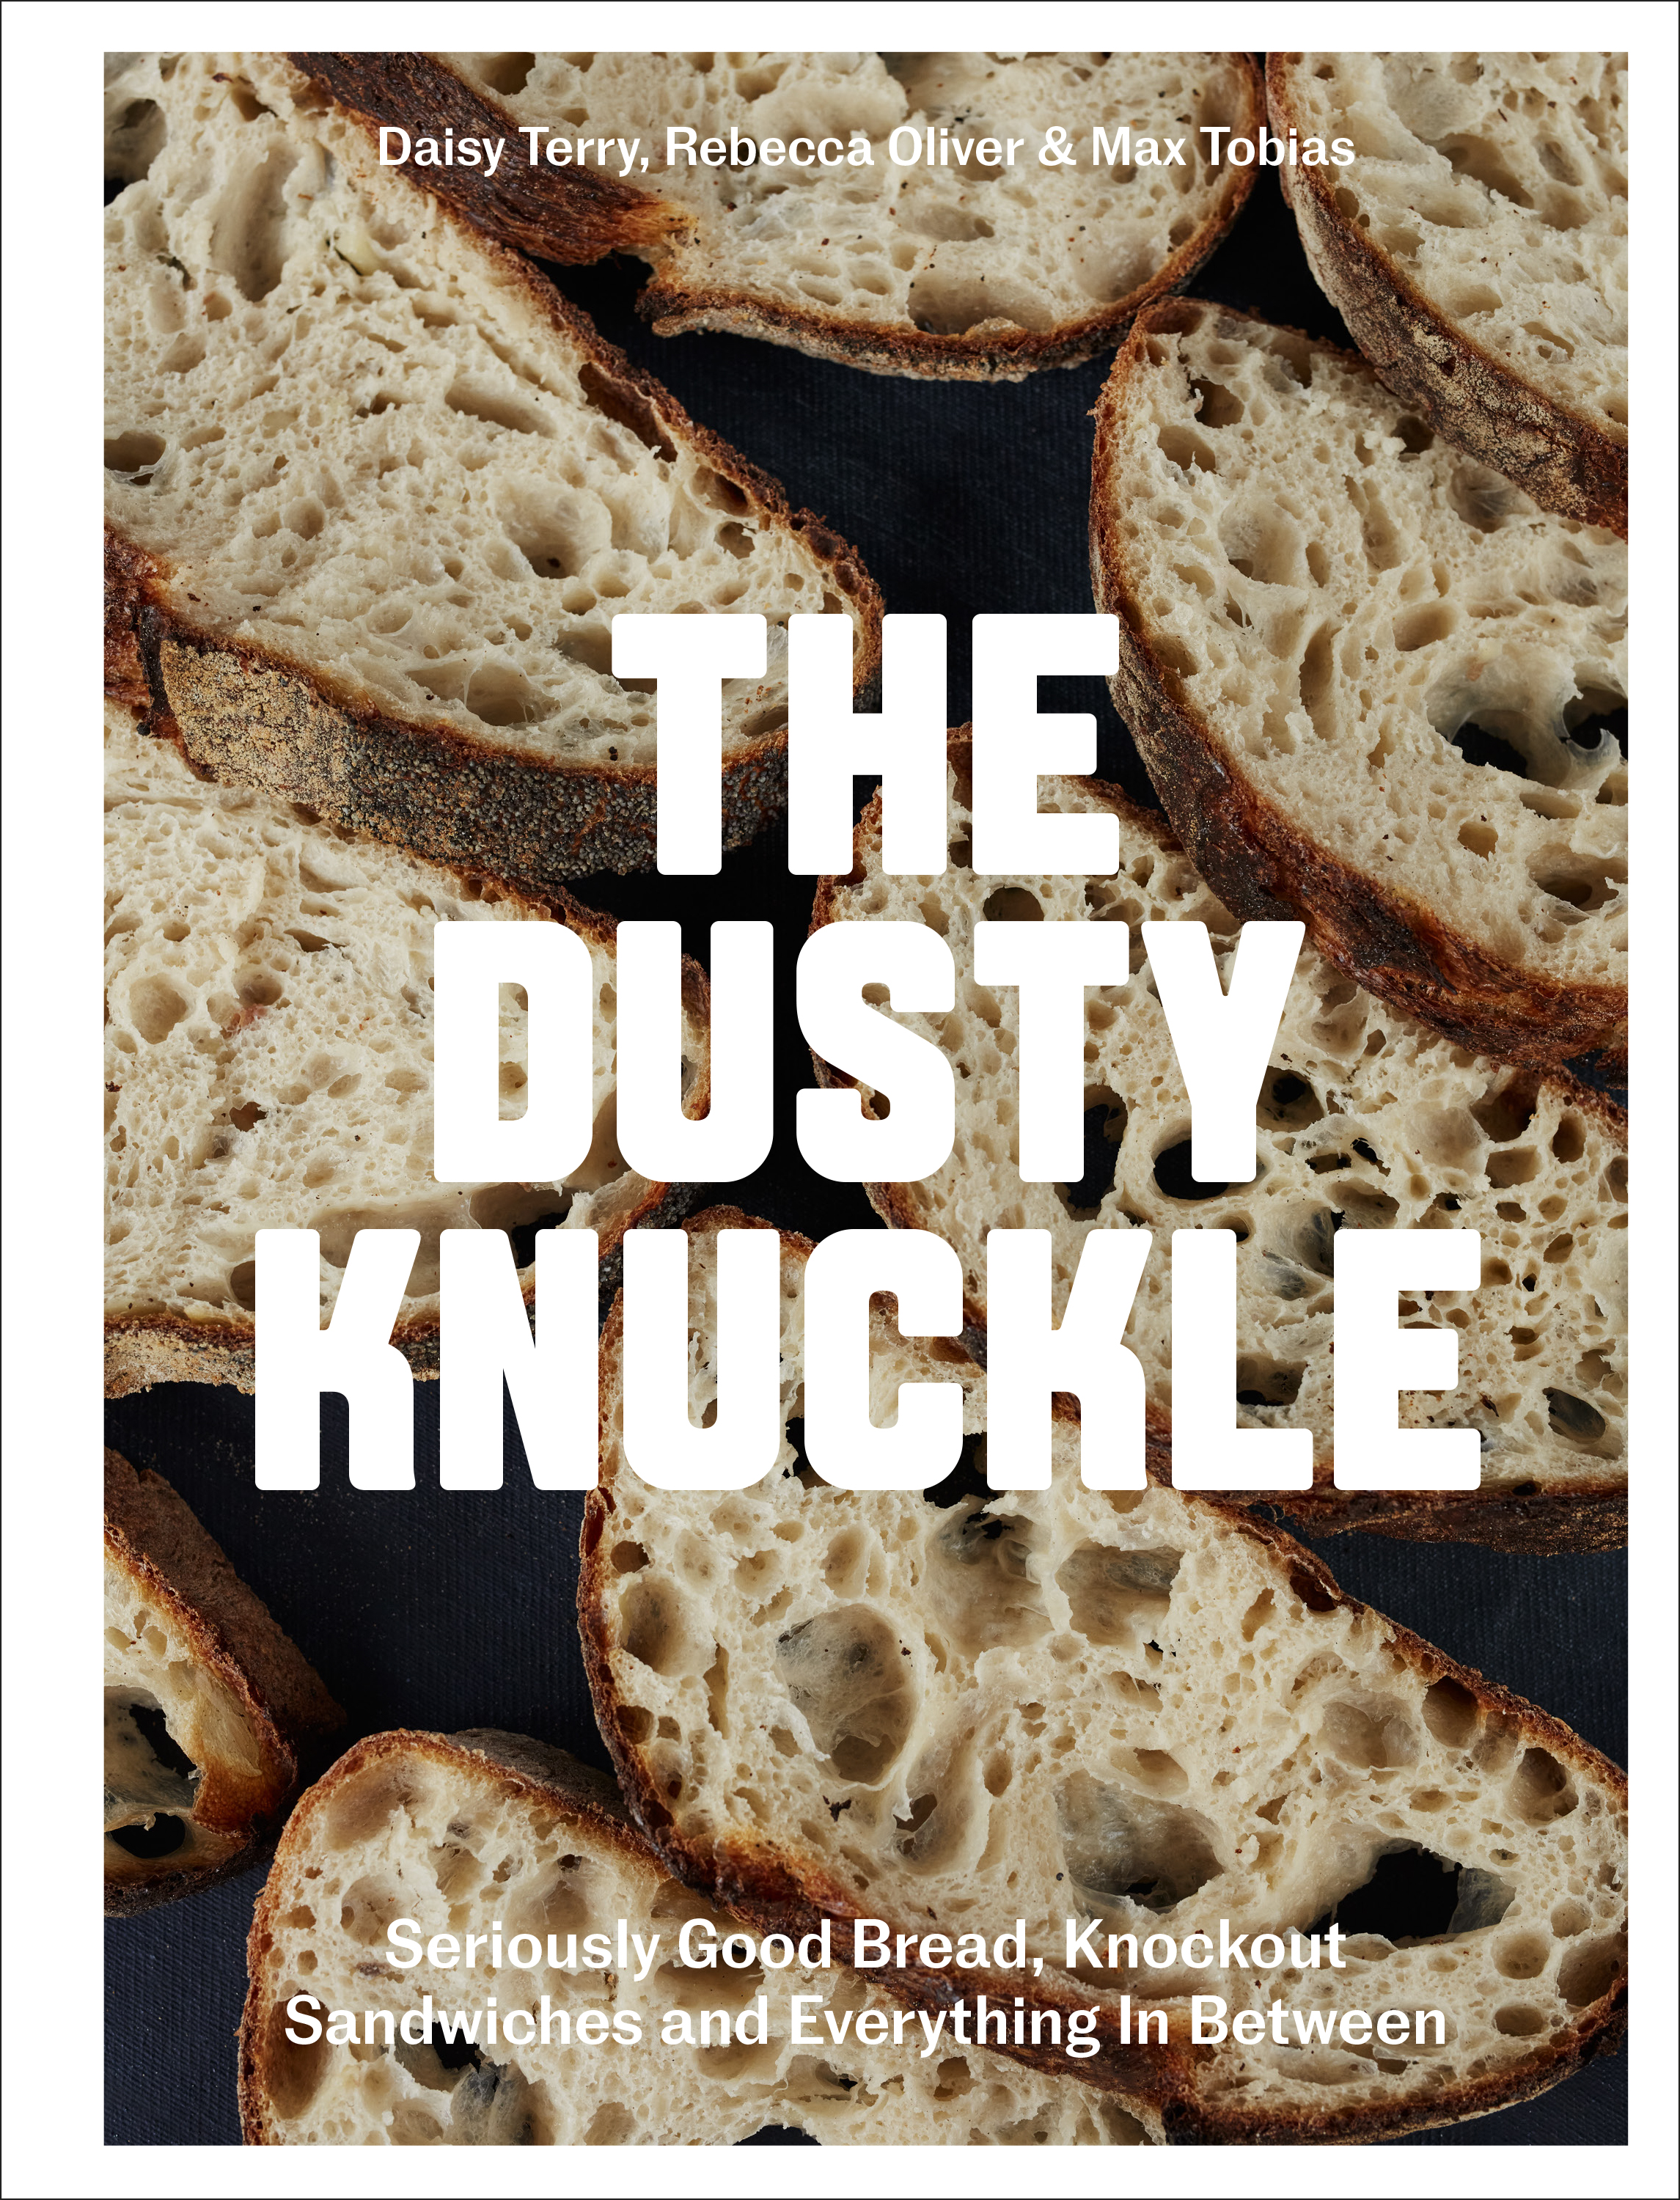 The Dusty Knuckle